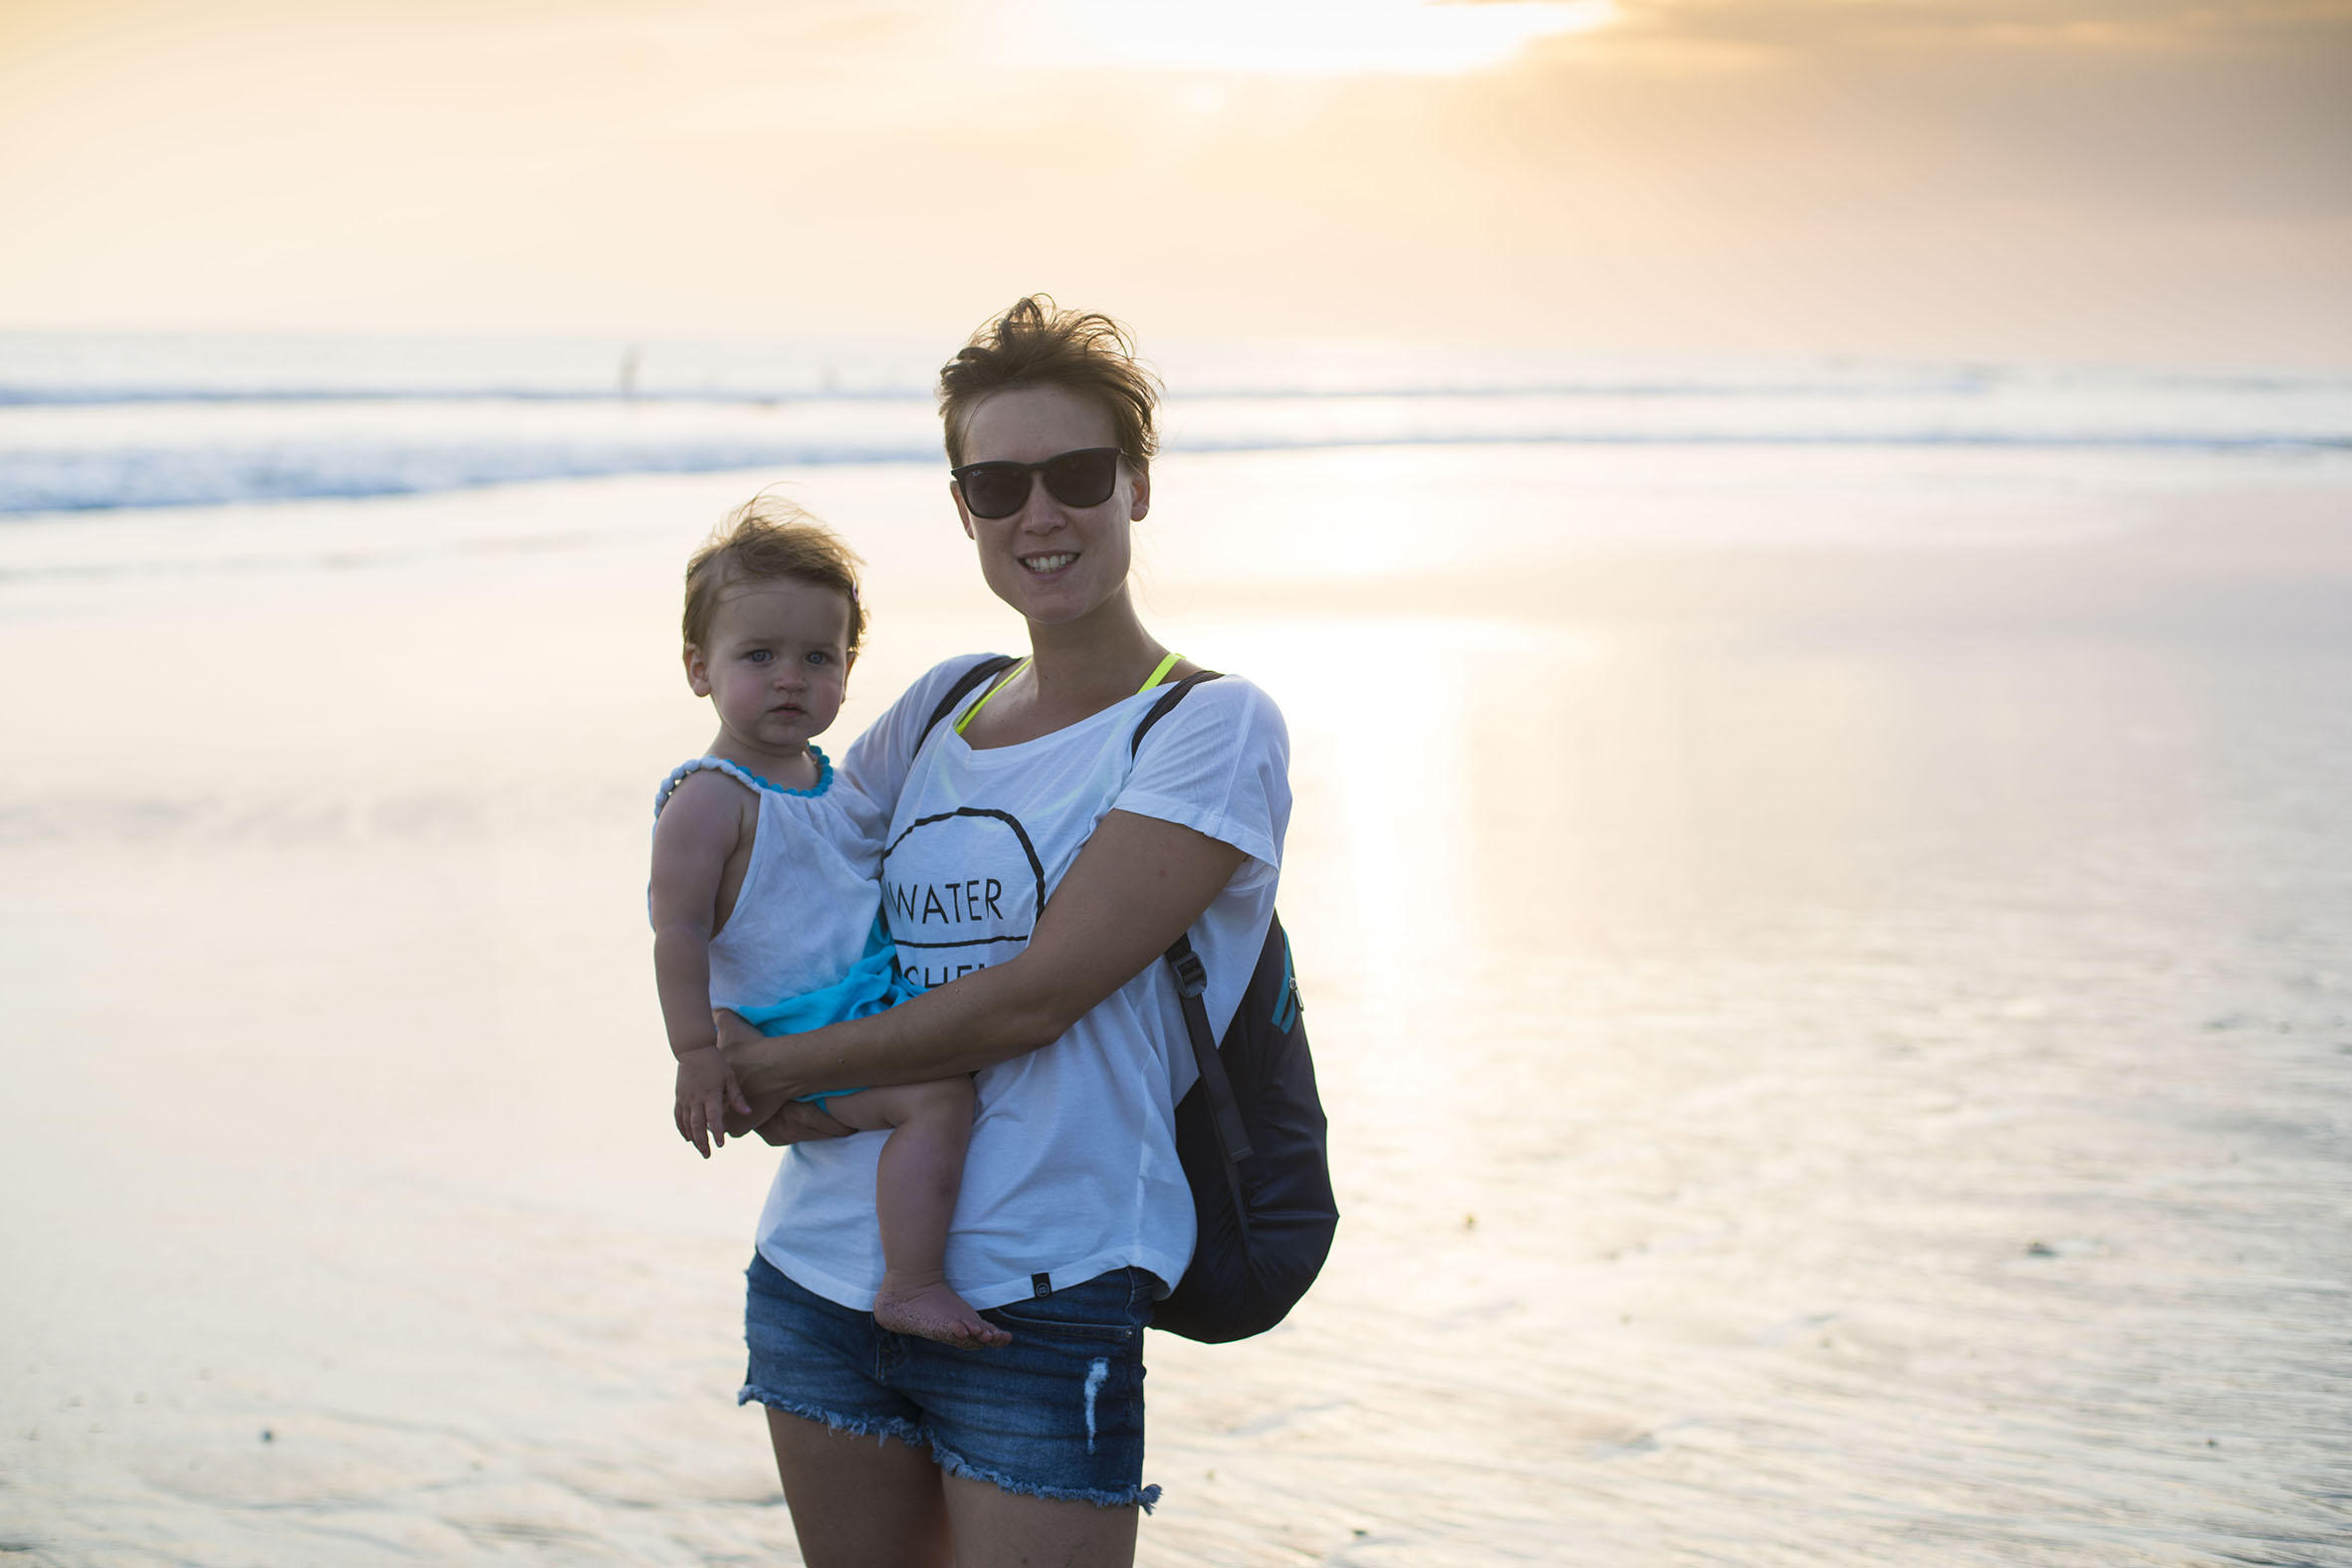 Emily and I on the beach at sunset in Canggu.